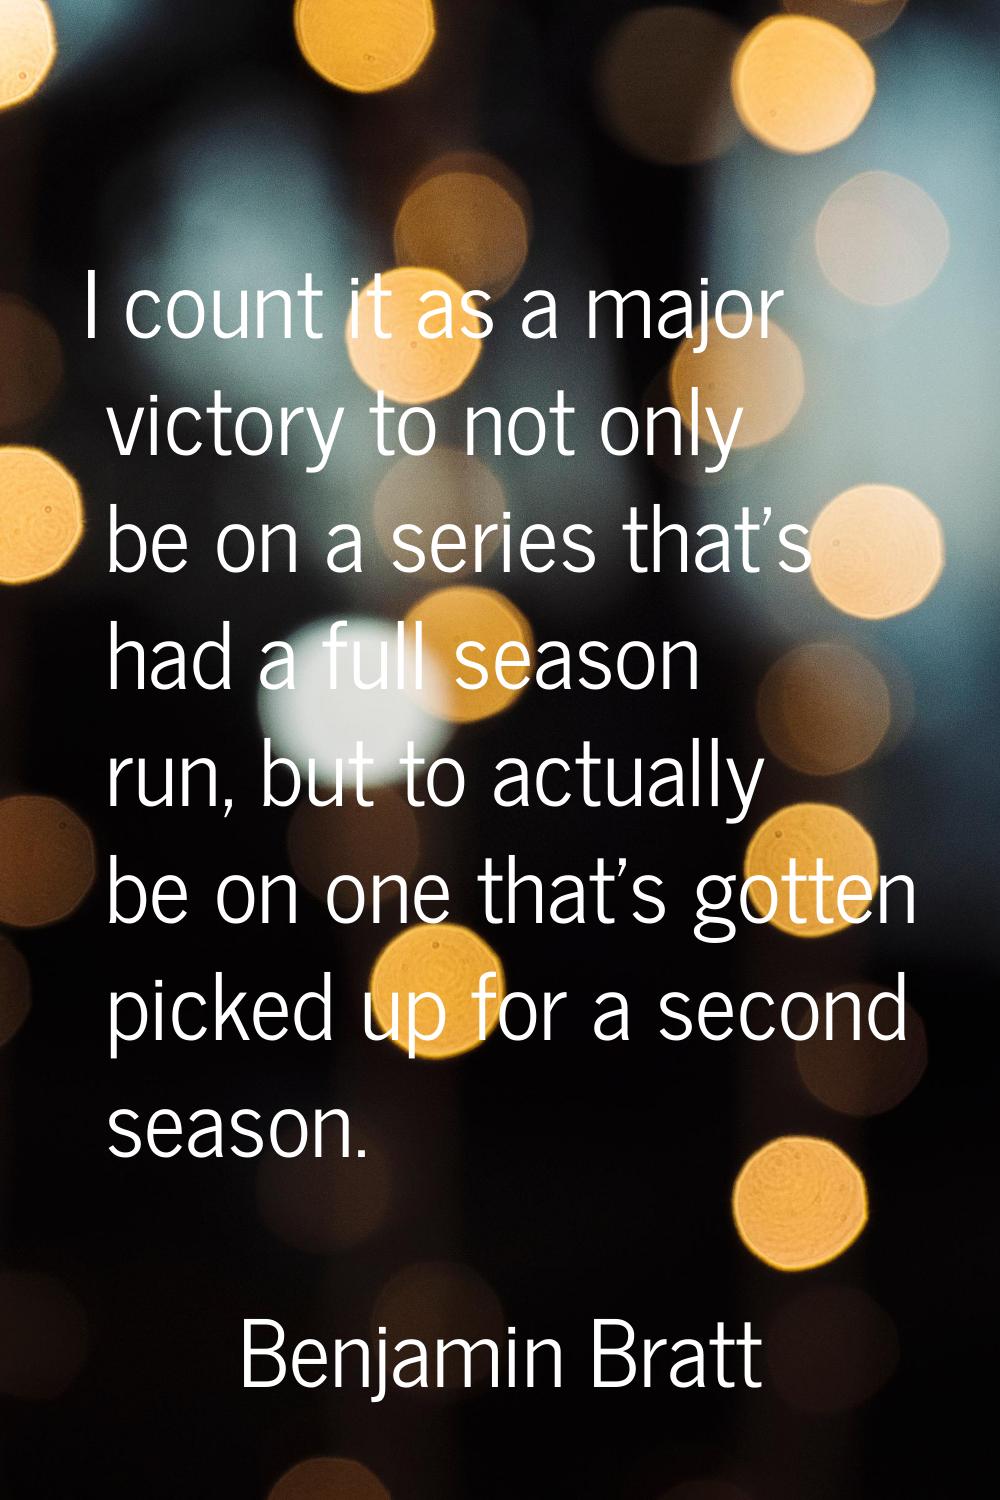 I count it as a major victory to not only be on a series that's had a full season run, but to actua